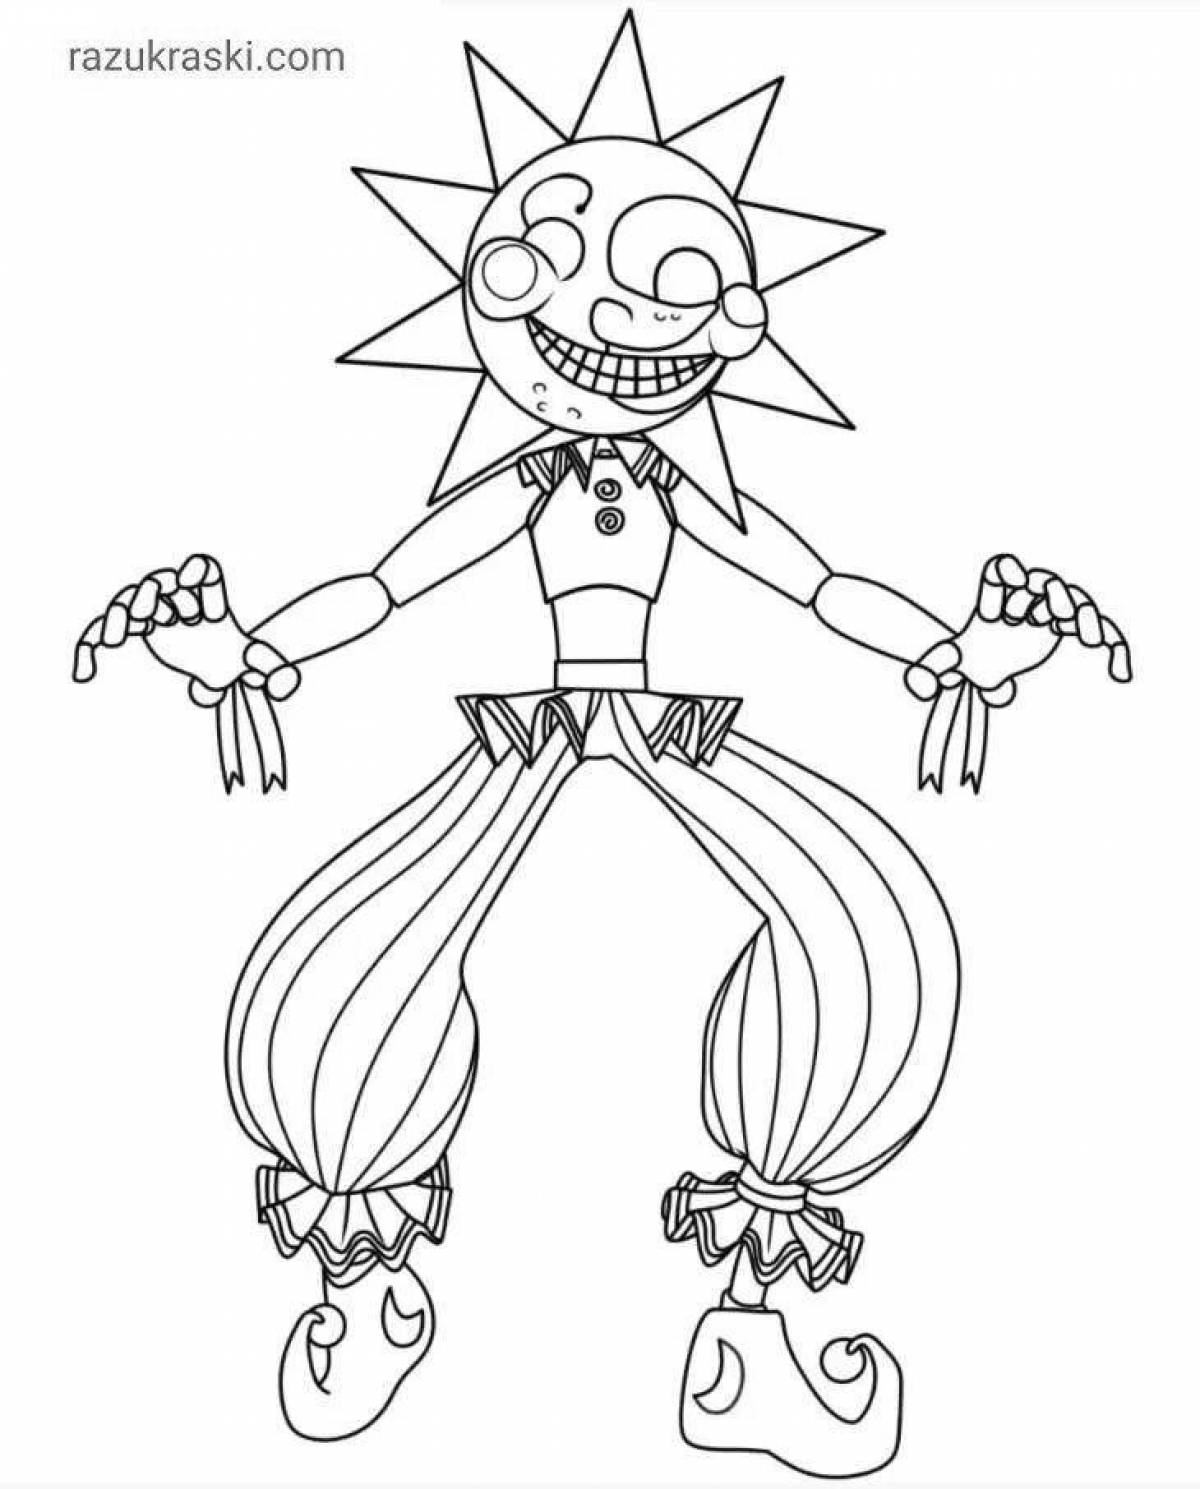 Adorable fnaf 9 sun and moon coloring book